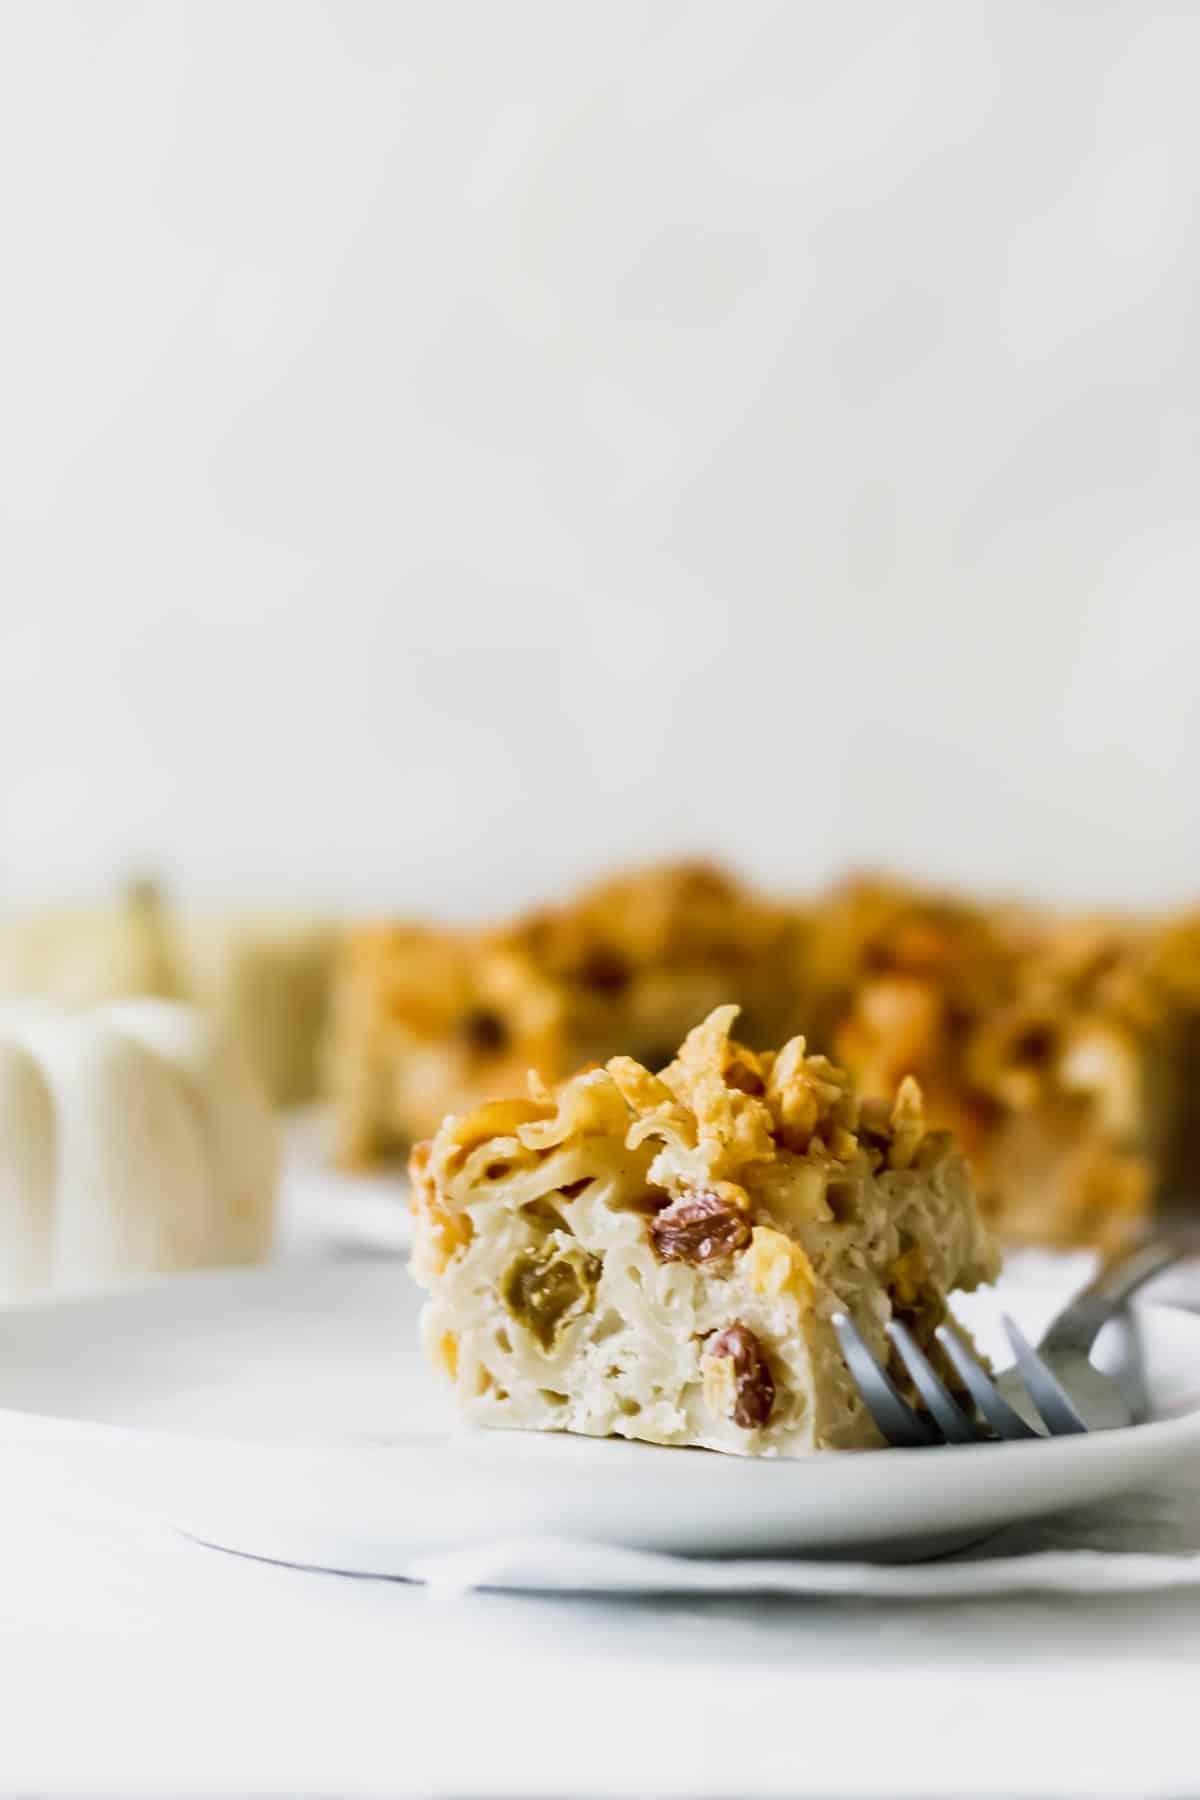 Up close view of a slice of kugel with a fork next to it.